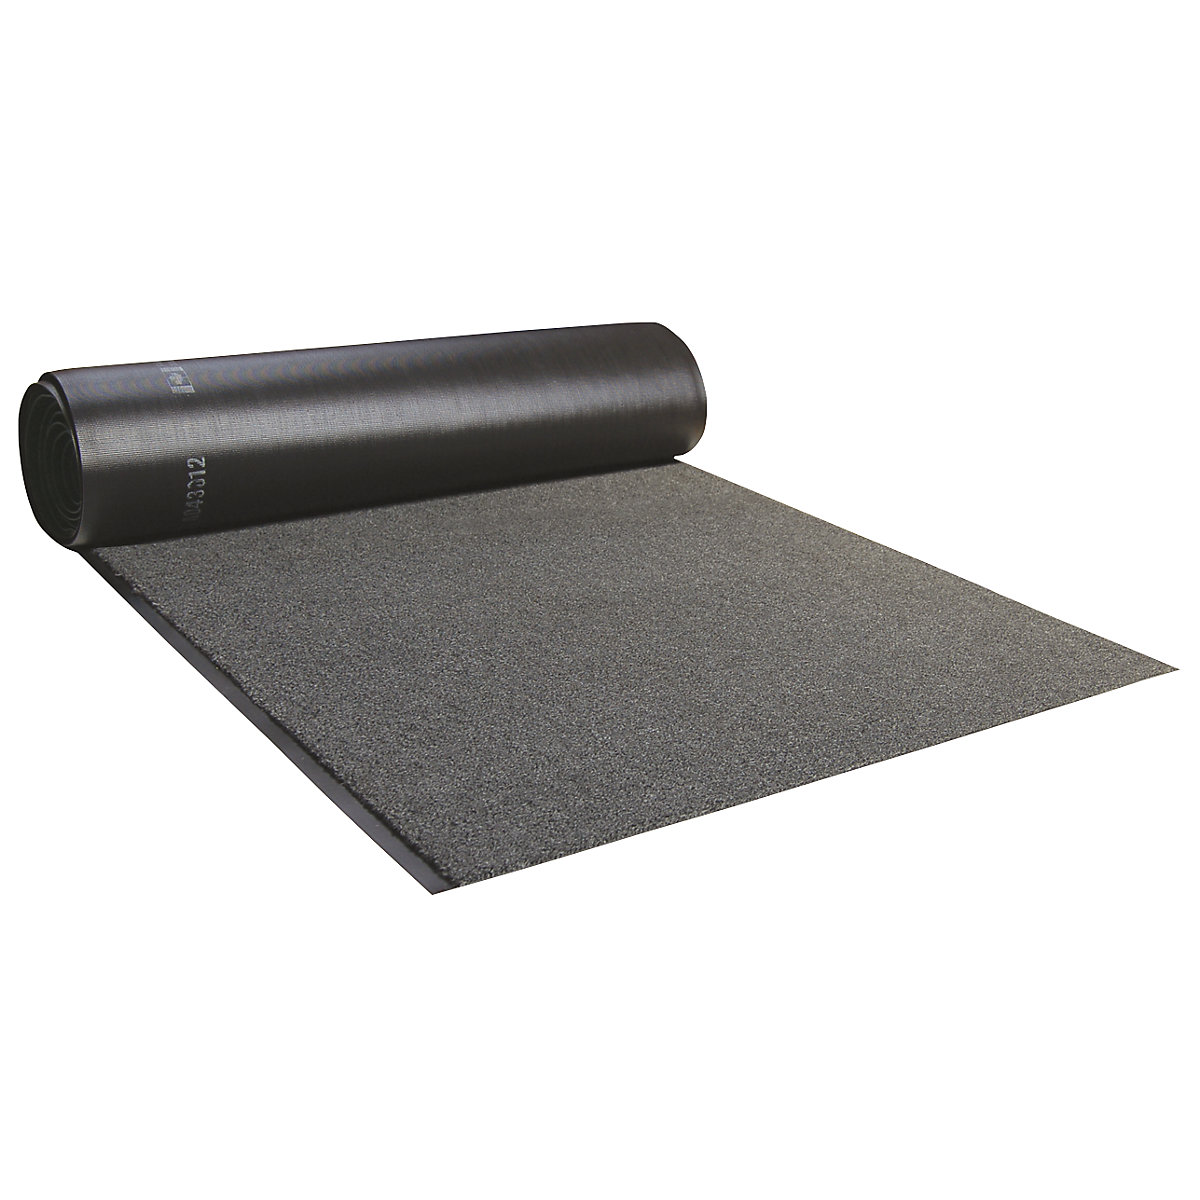 EAZYCARE AQUA entrance matting, width 1850 mm, sold by the metre, grey